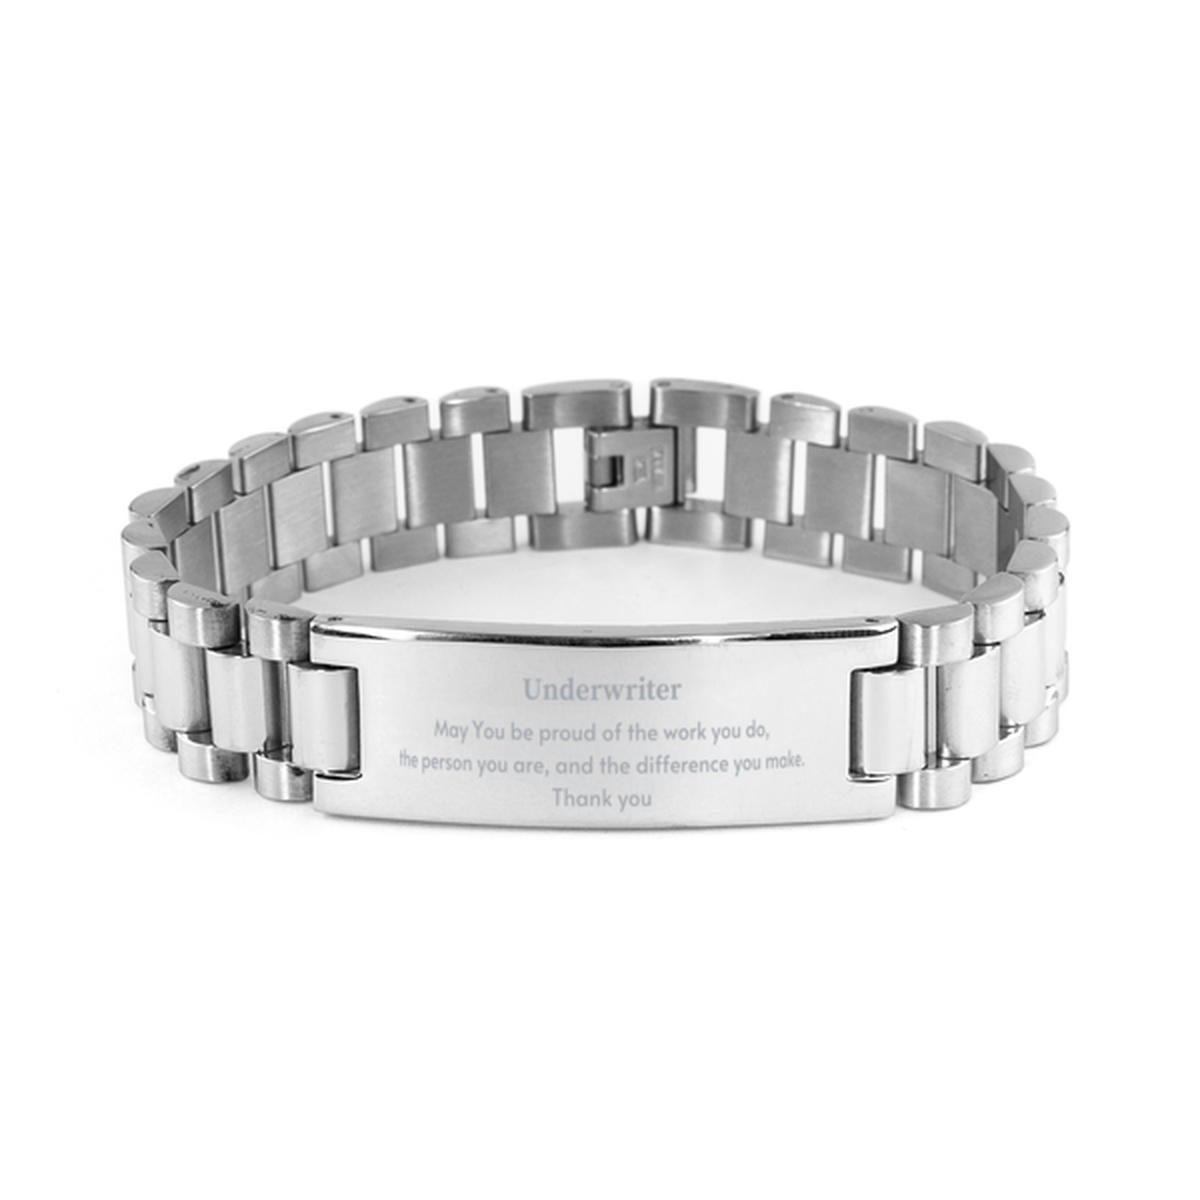 Heartwarming Ladder Stainless Steel Bracelet Retirement Coworkers Gifts for Underwriter, Underwriter May You be proud of the work you do, the person you are Gifts for Boss Men Women Friends